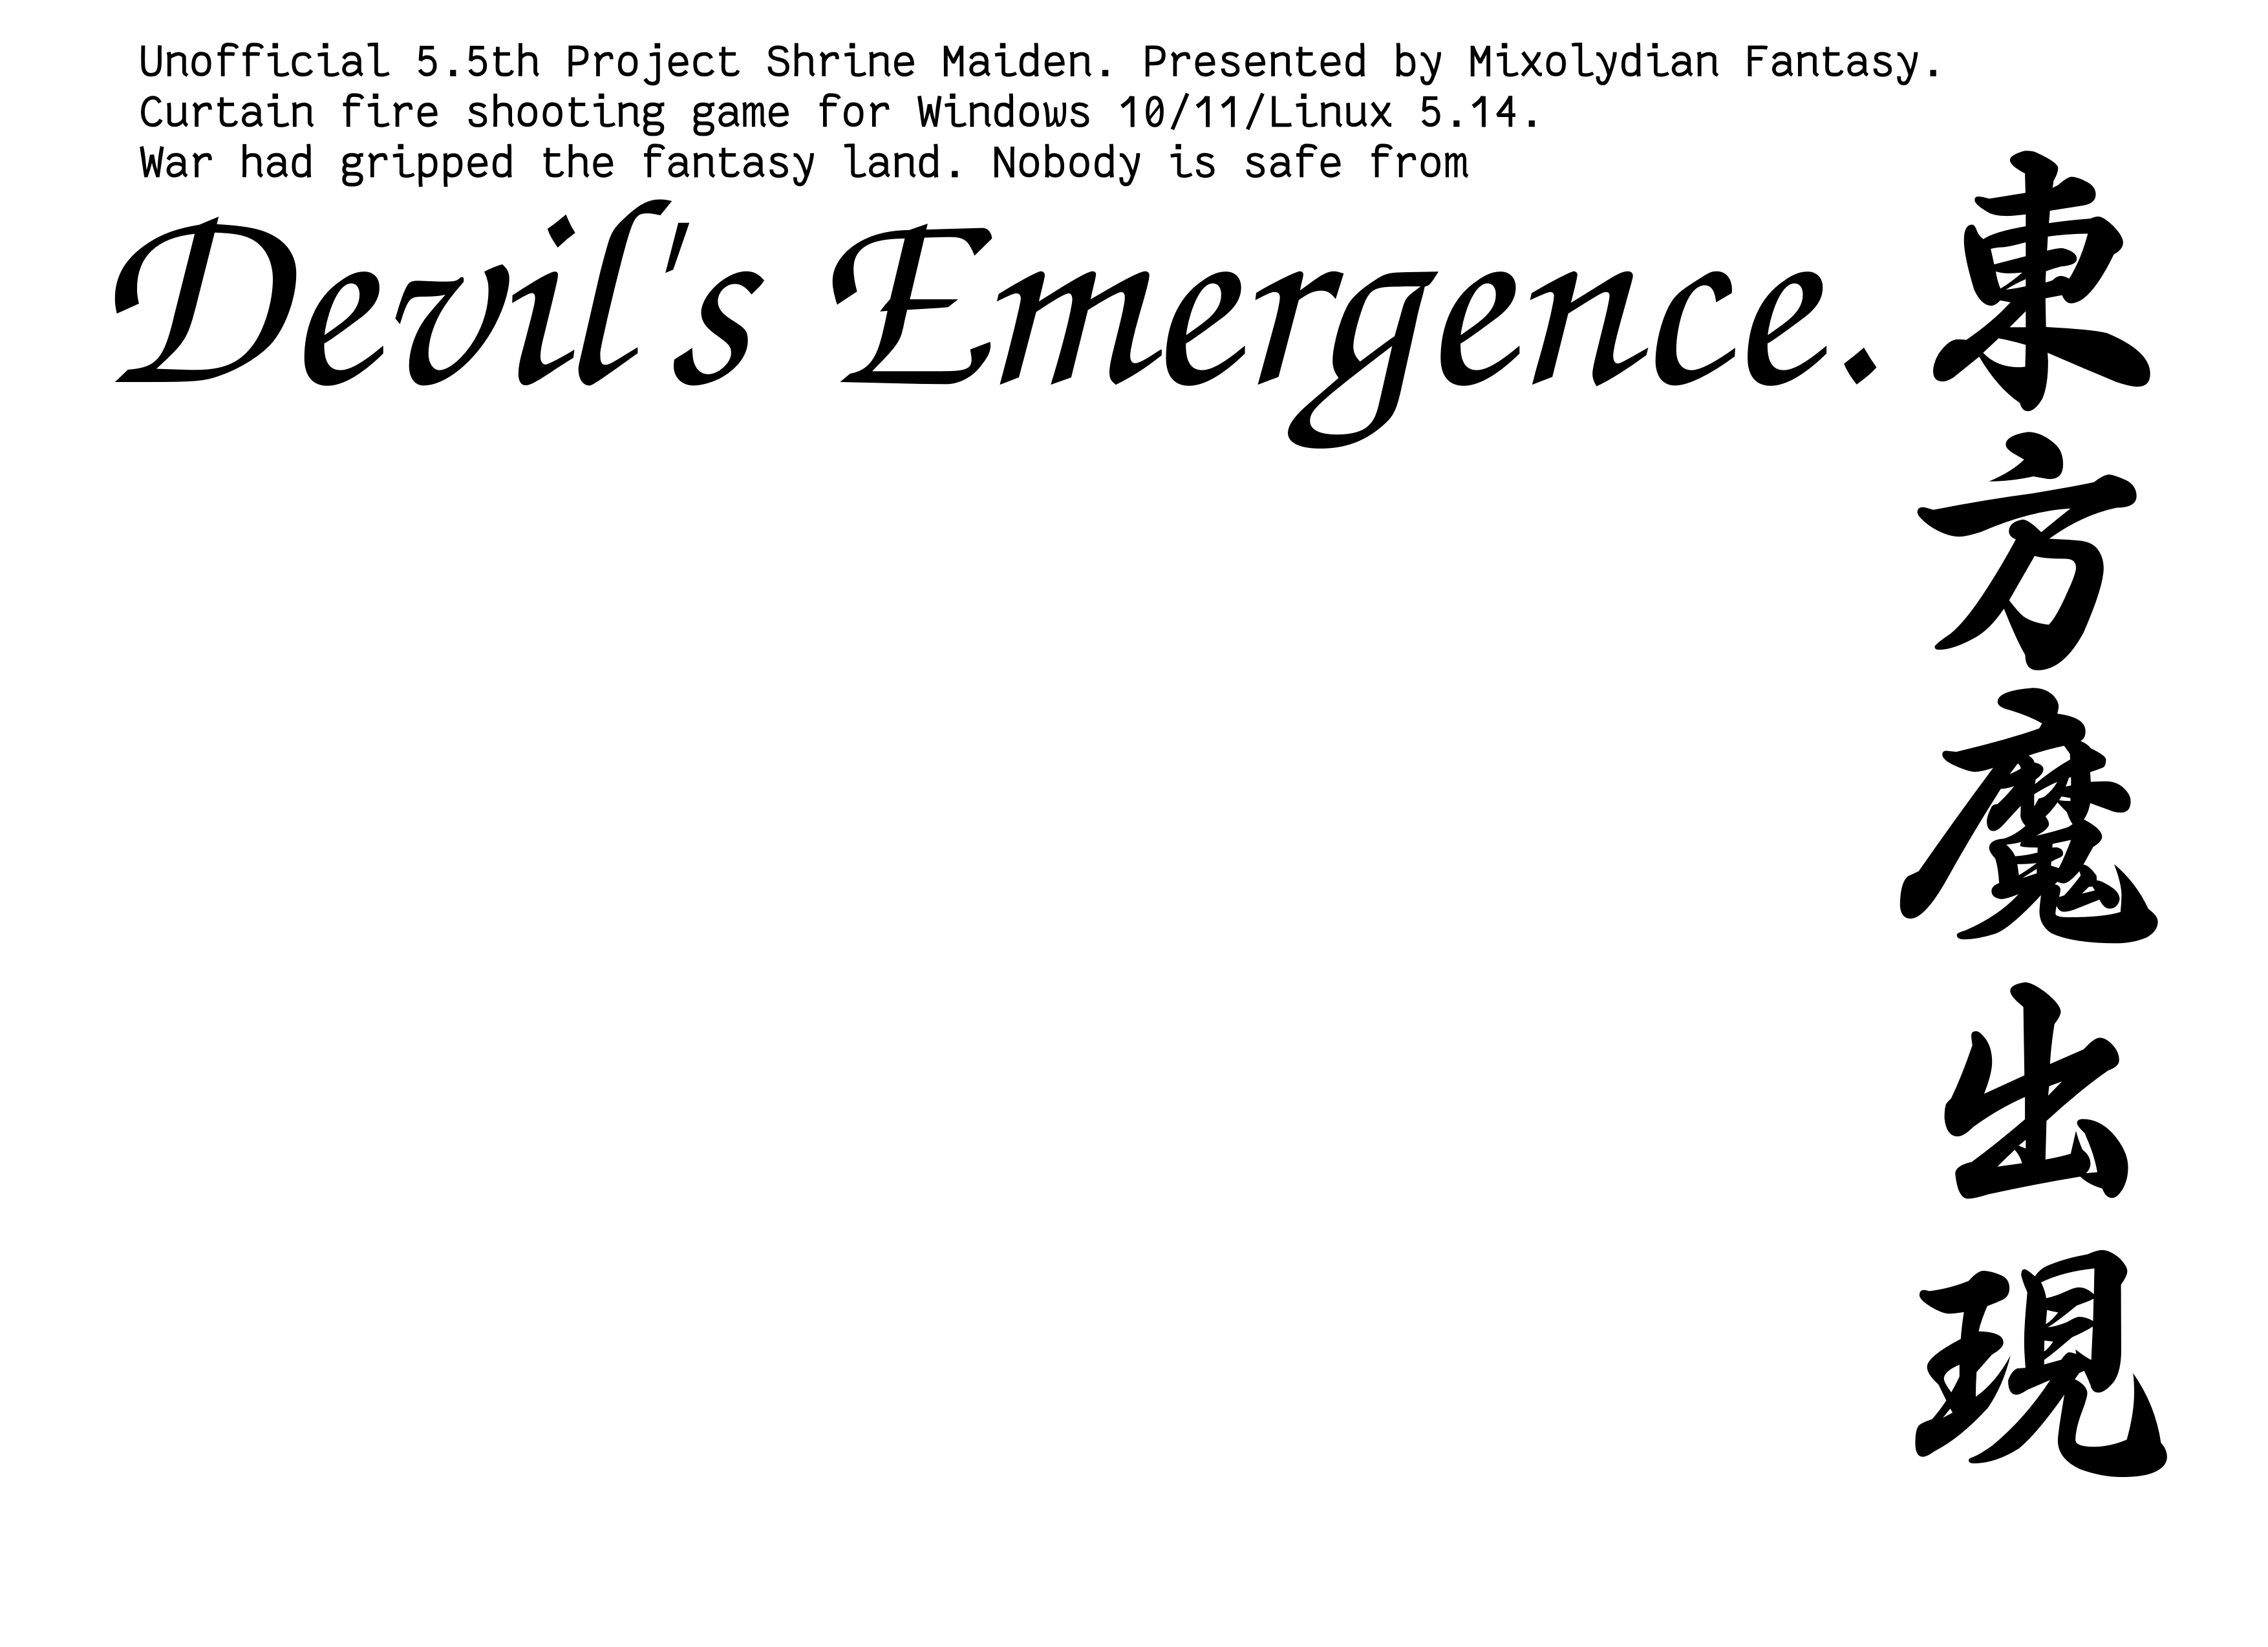 Text layout for Devil's Emergence's cover art. "Touhou Mashutsugen" is written in kanji on the right, similar to the PC-98 Touhou games. The tagline reads "Unofficial 5.5th Project Shrine Maiden. Presented by Mixolydian Fantasy. Curtain fire shooting game for Windows 10/11/Linux 5.14. War had gripped the fantasy land. Nobody is safe from Devil's Emergence."